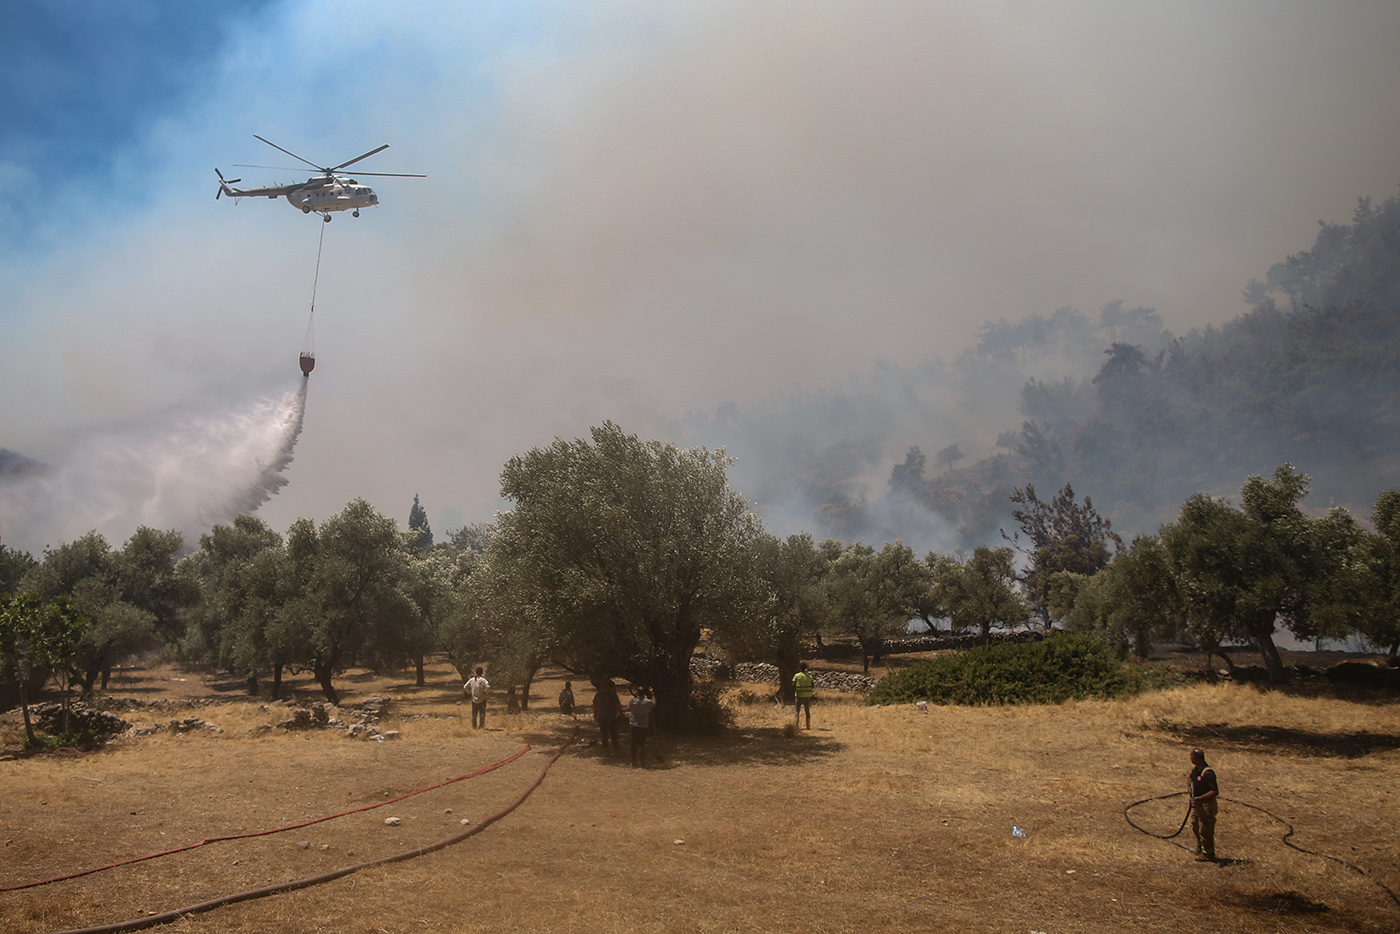 A helicopter waterbombs a wildfire burning at the Cokertme village of Milas district of Mugla, Turkey, 02 August 2021. Turkish Health minister Fahrettin Koca confirmed that eight people have lost their lives due to the wildfires raging in Turkey’s Mediterranean towns.